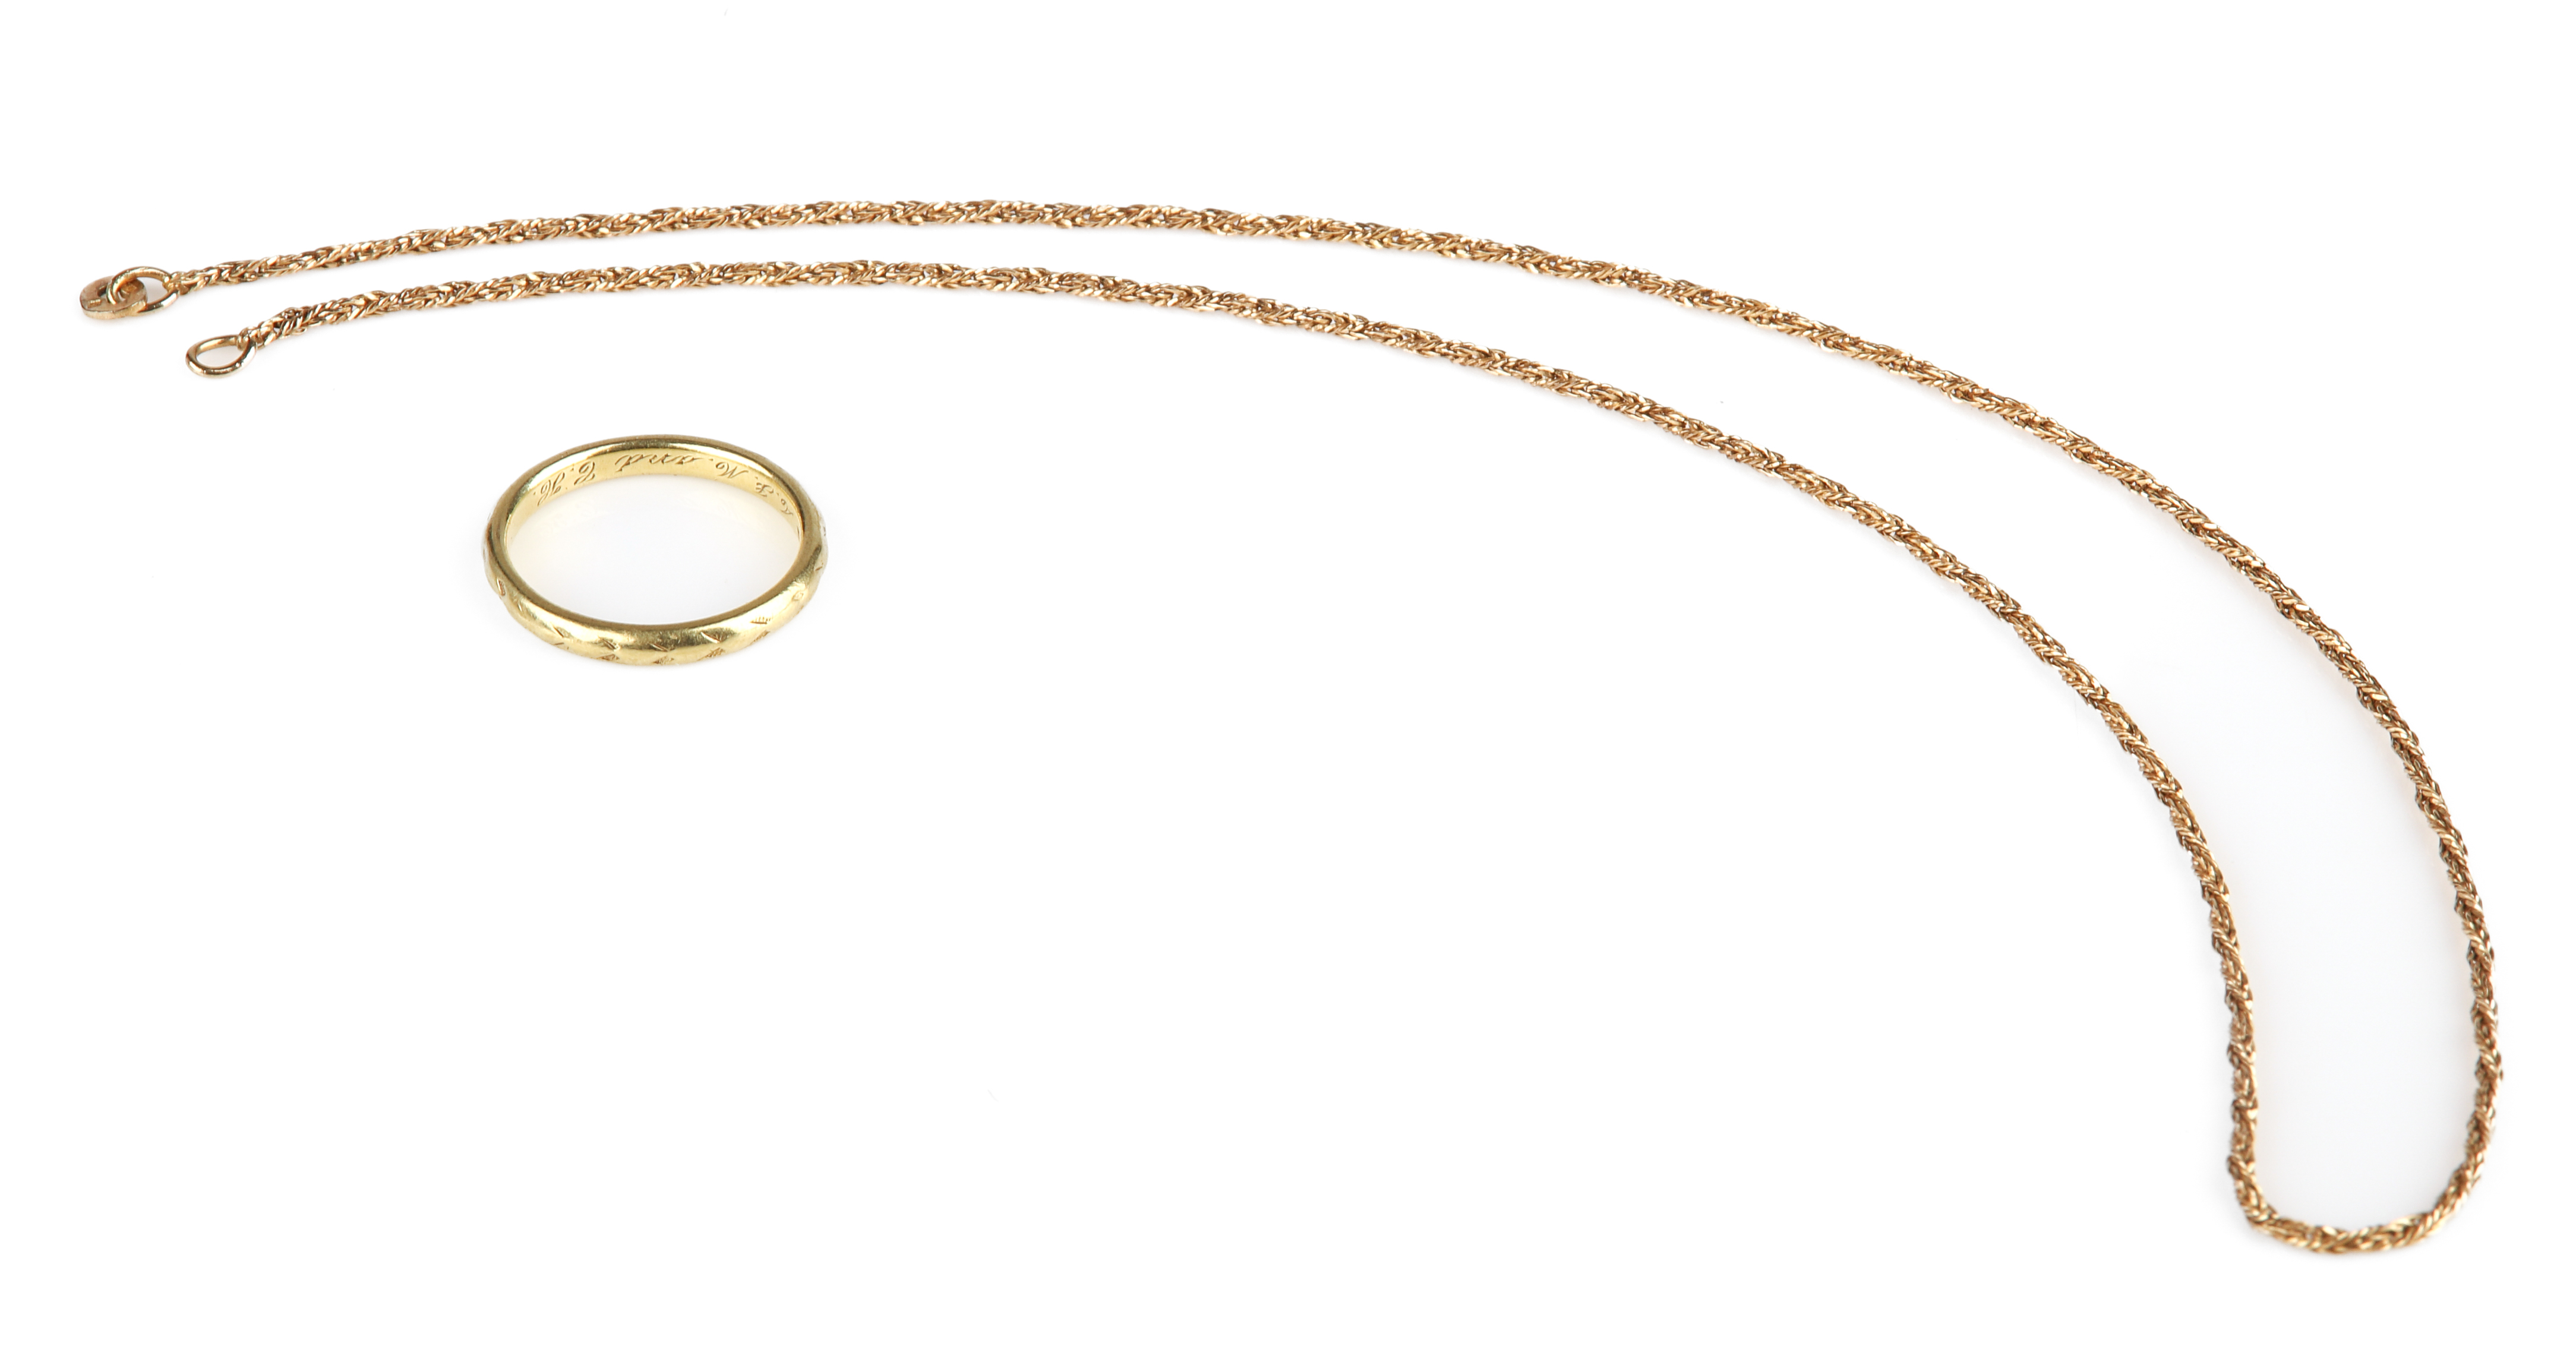 18K Yellow gold chain and wedding band